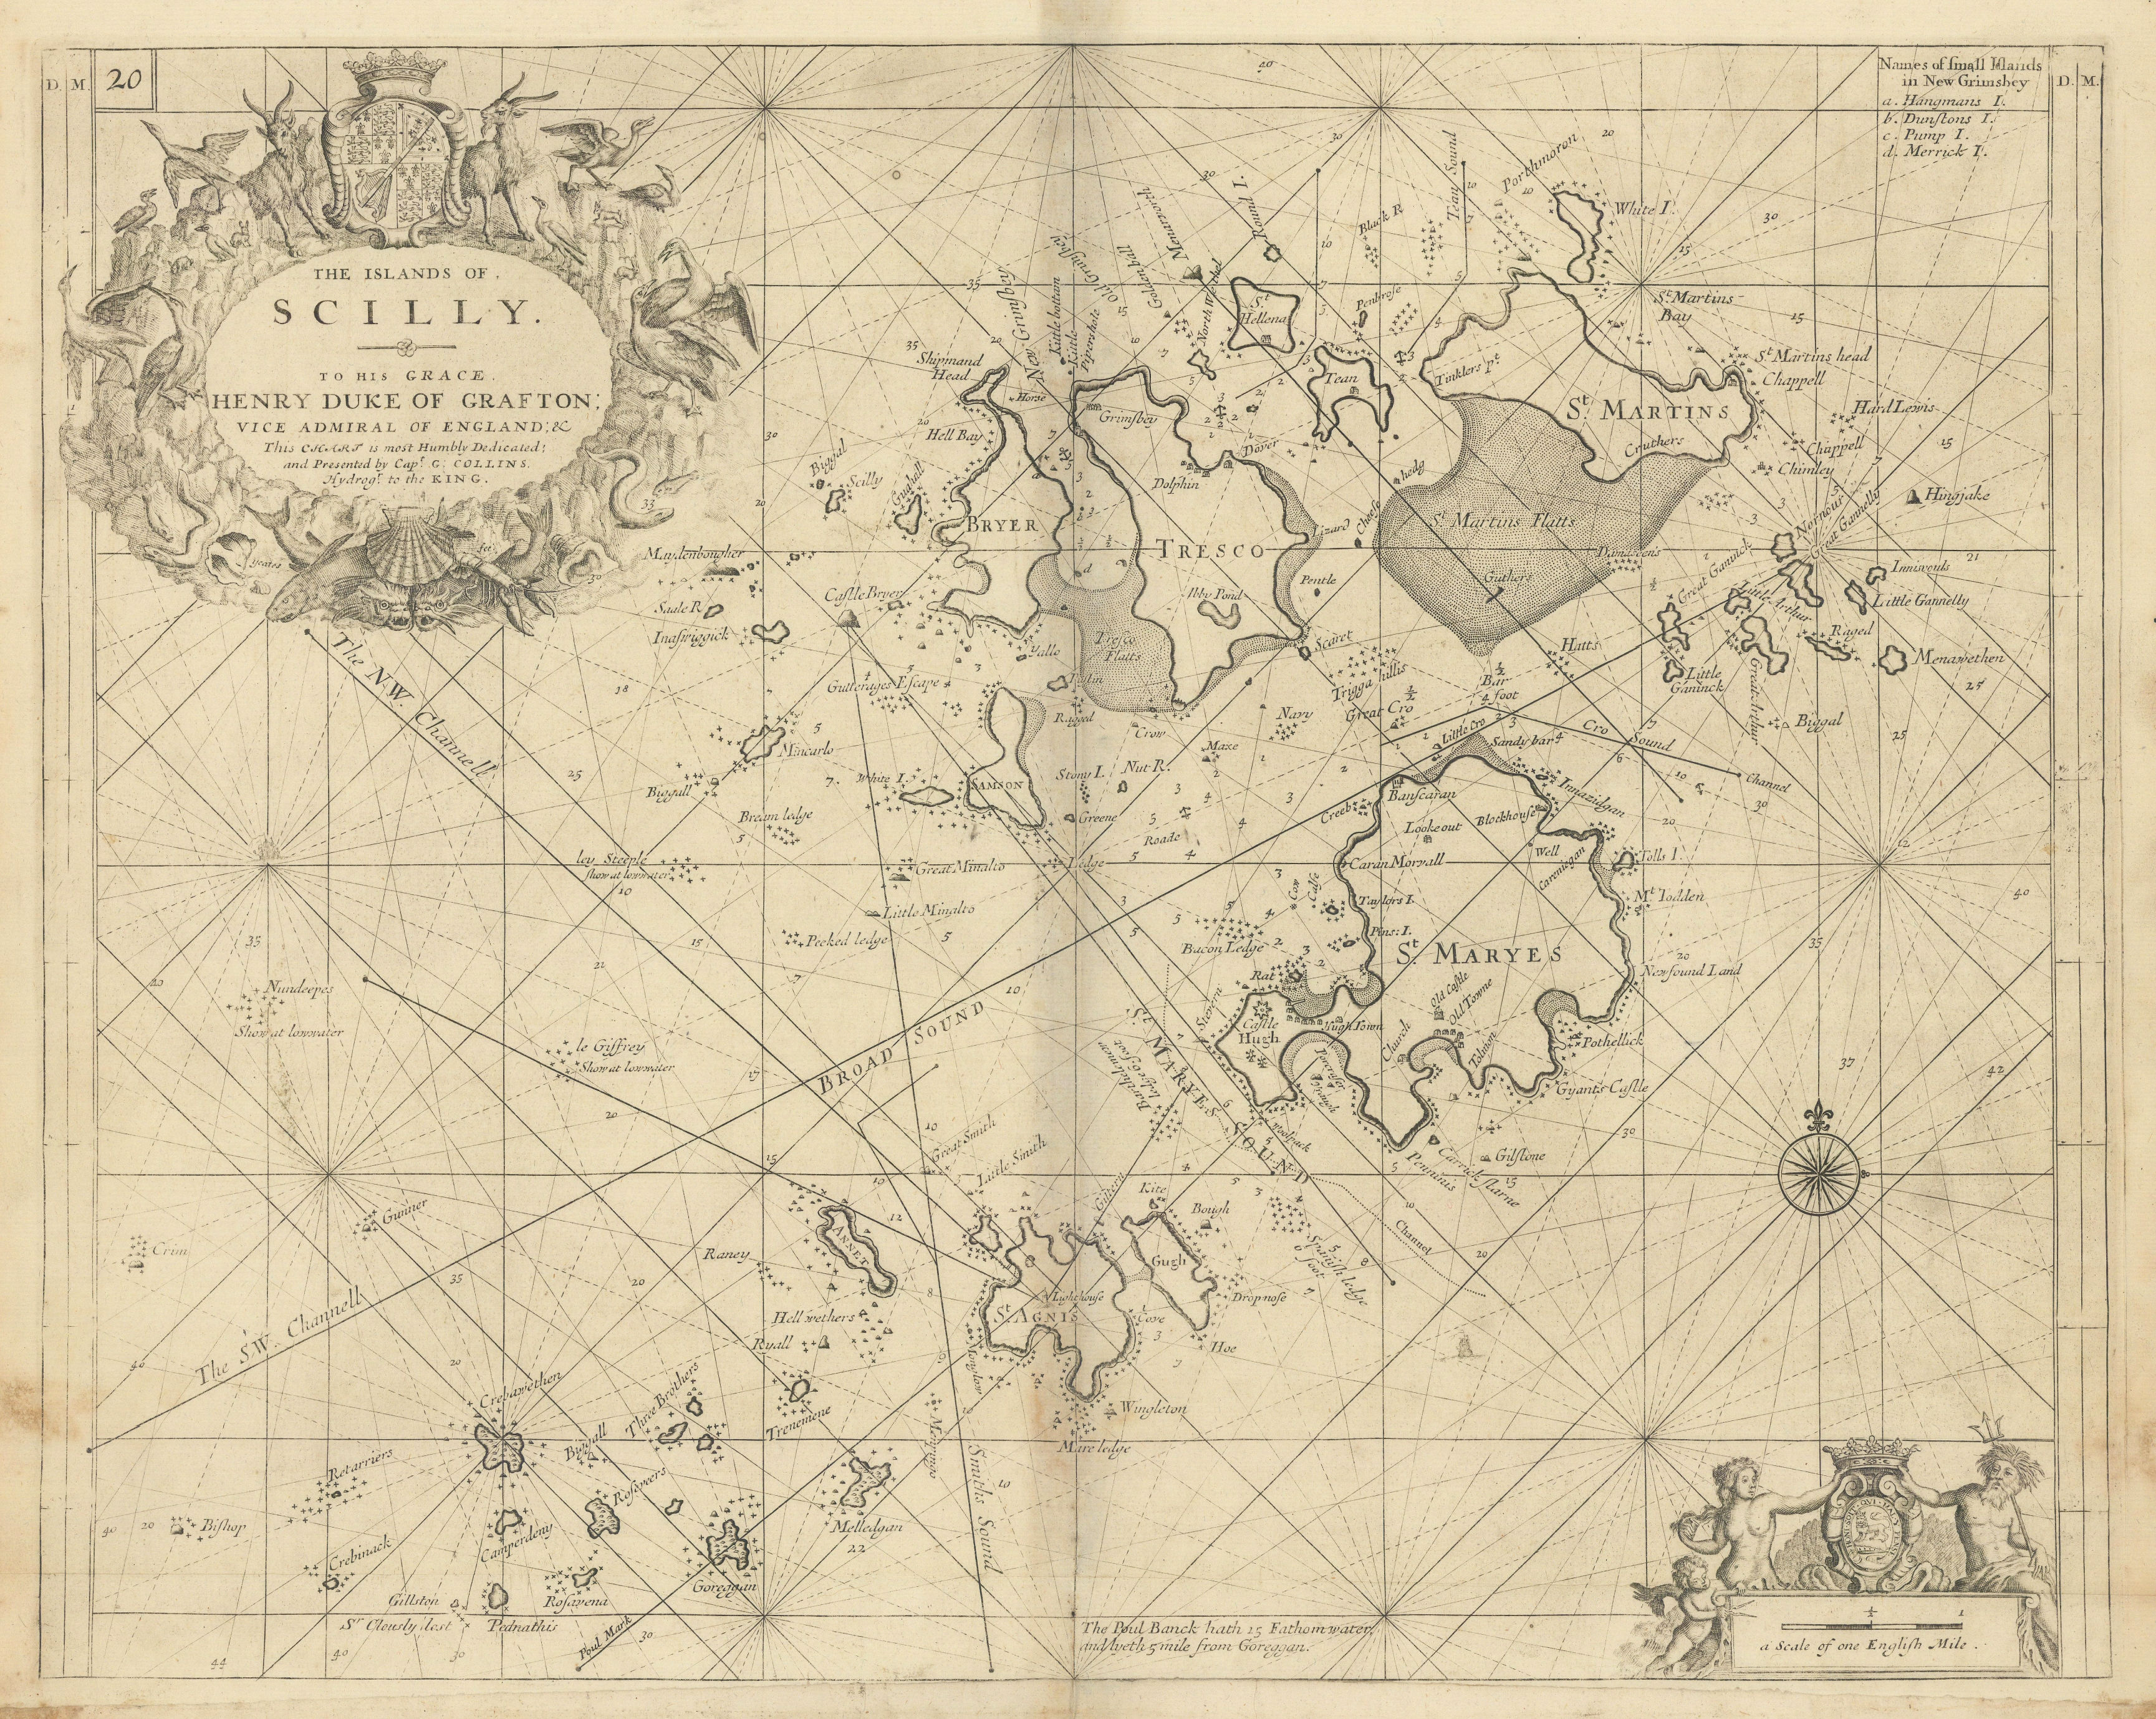 THE ISLANDS OF SCILLY sea chart by Captain Greenvile. COLLINS 1723 old map